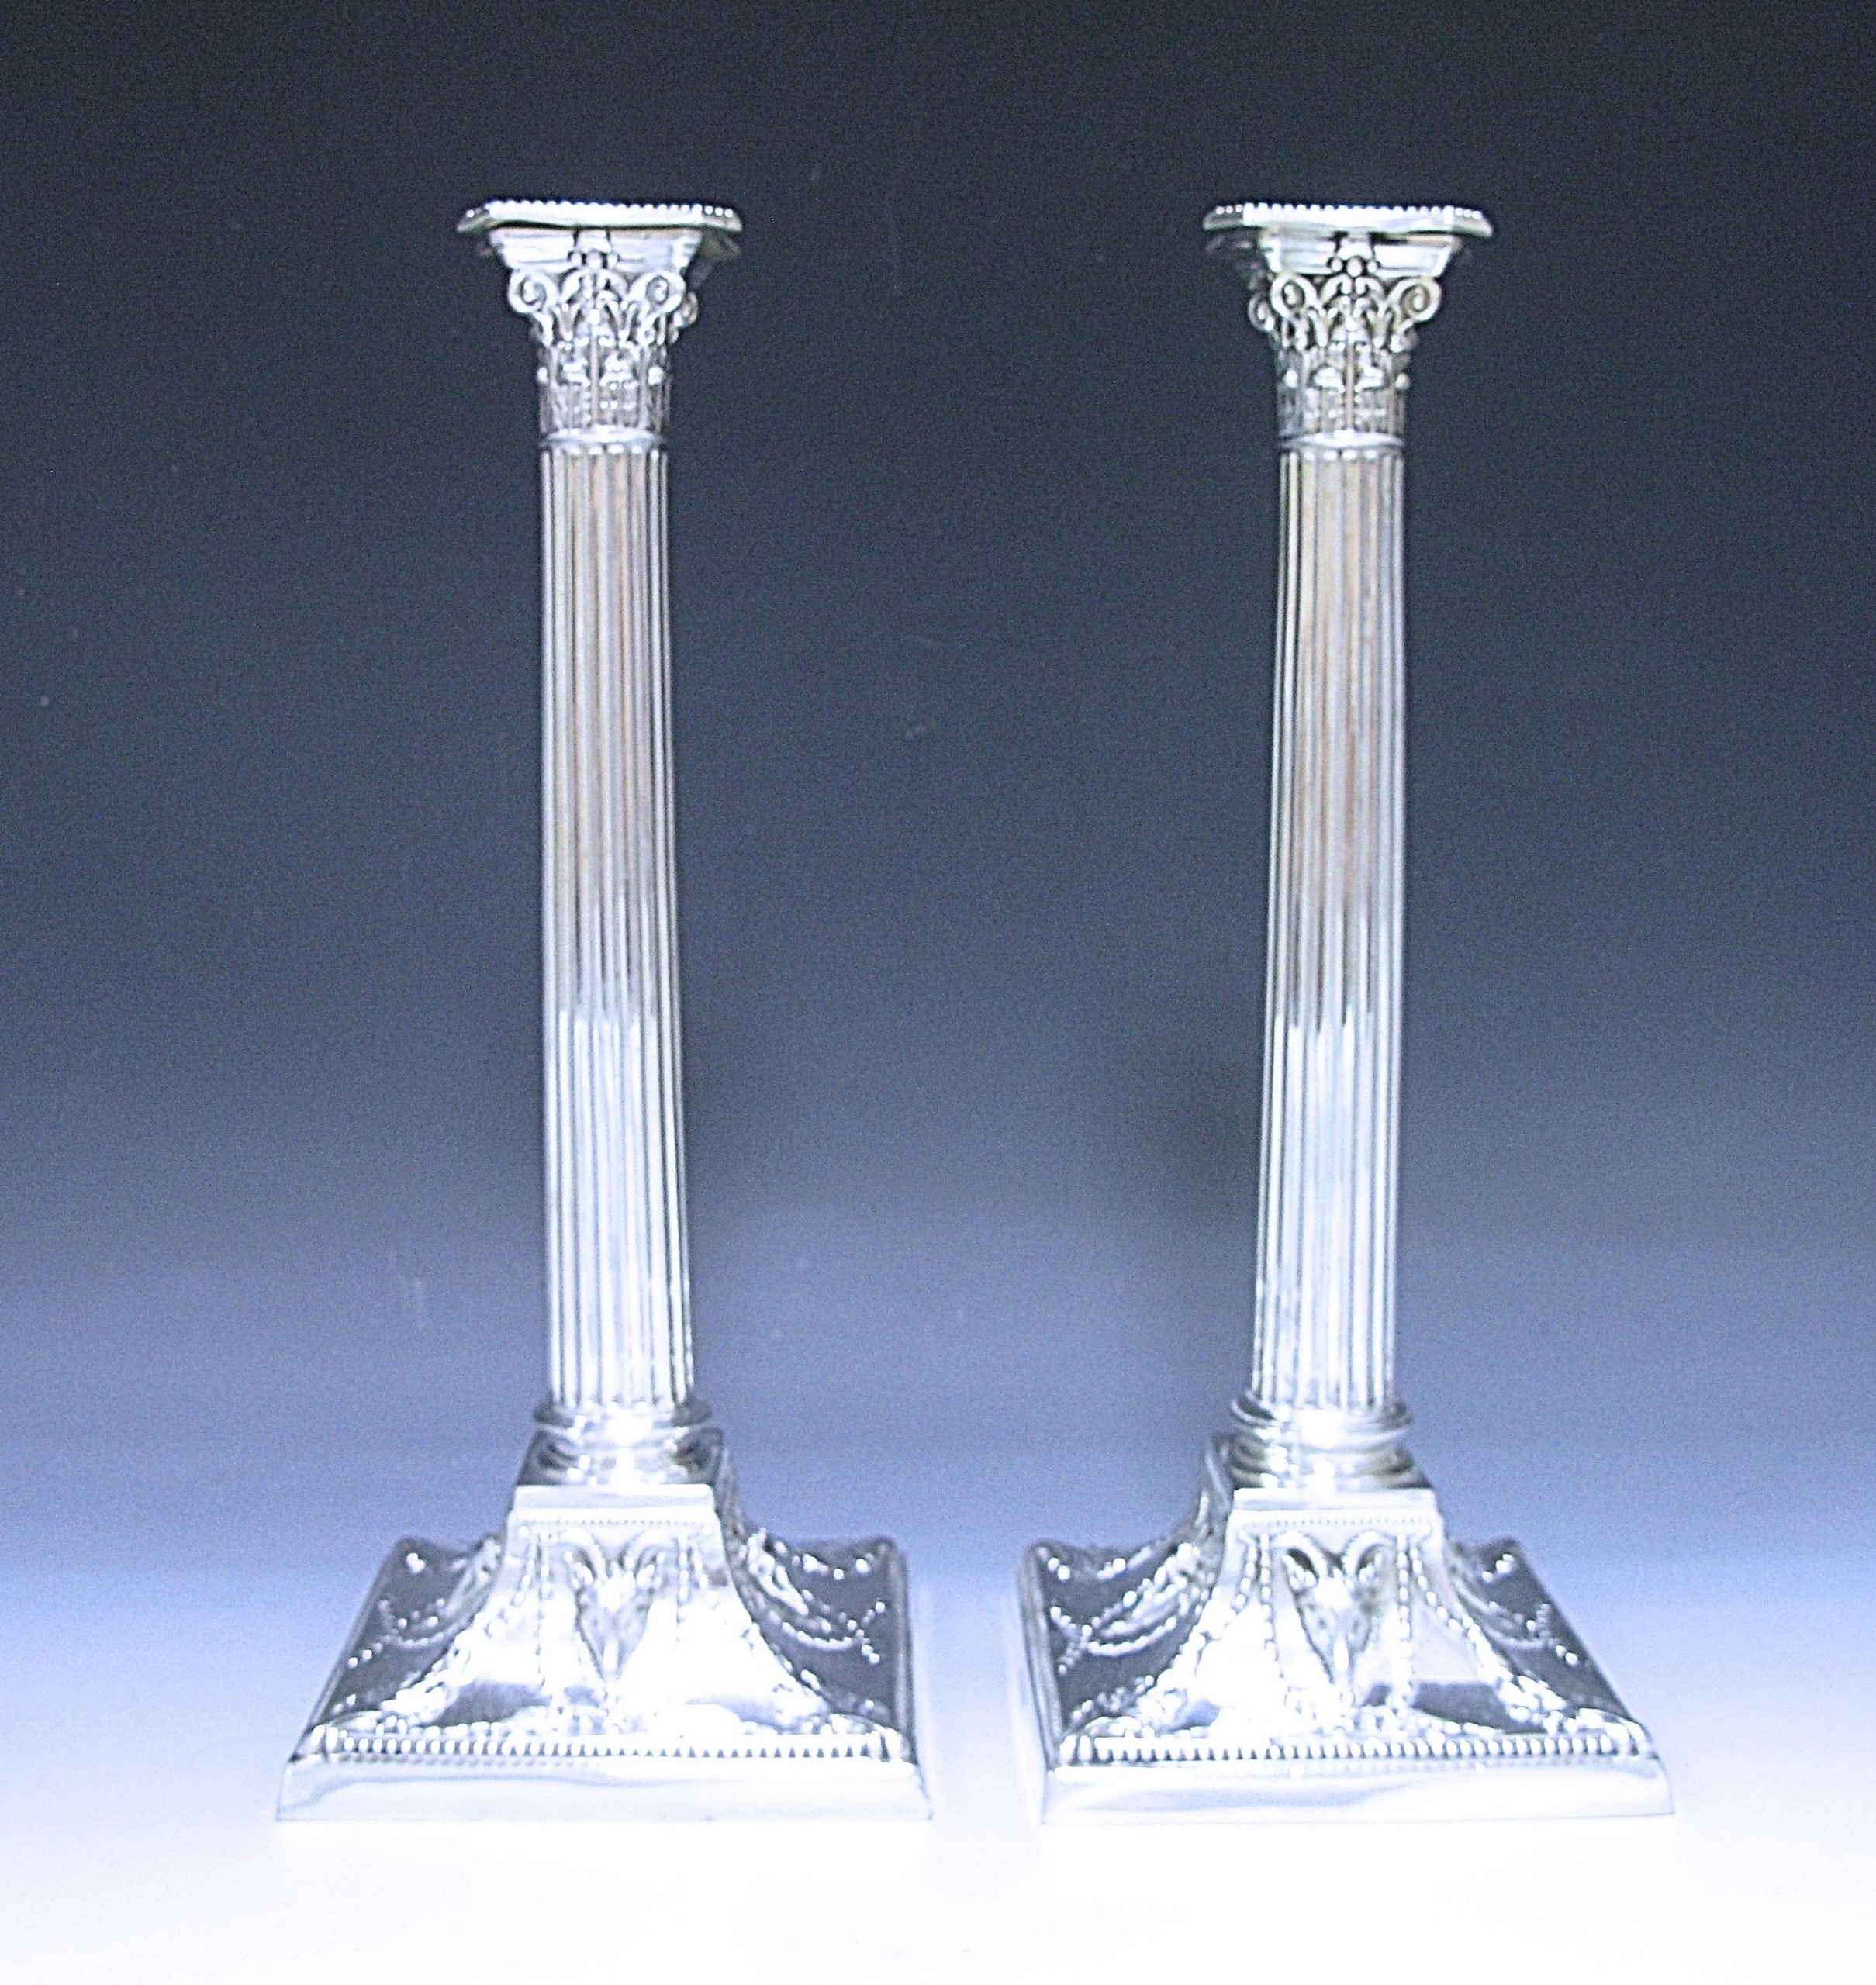 A Pair of Victorian Antique Silver Candlesticks 1